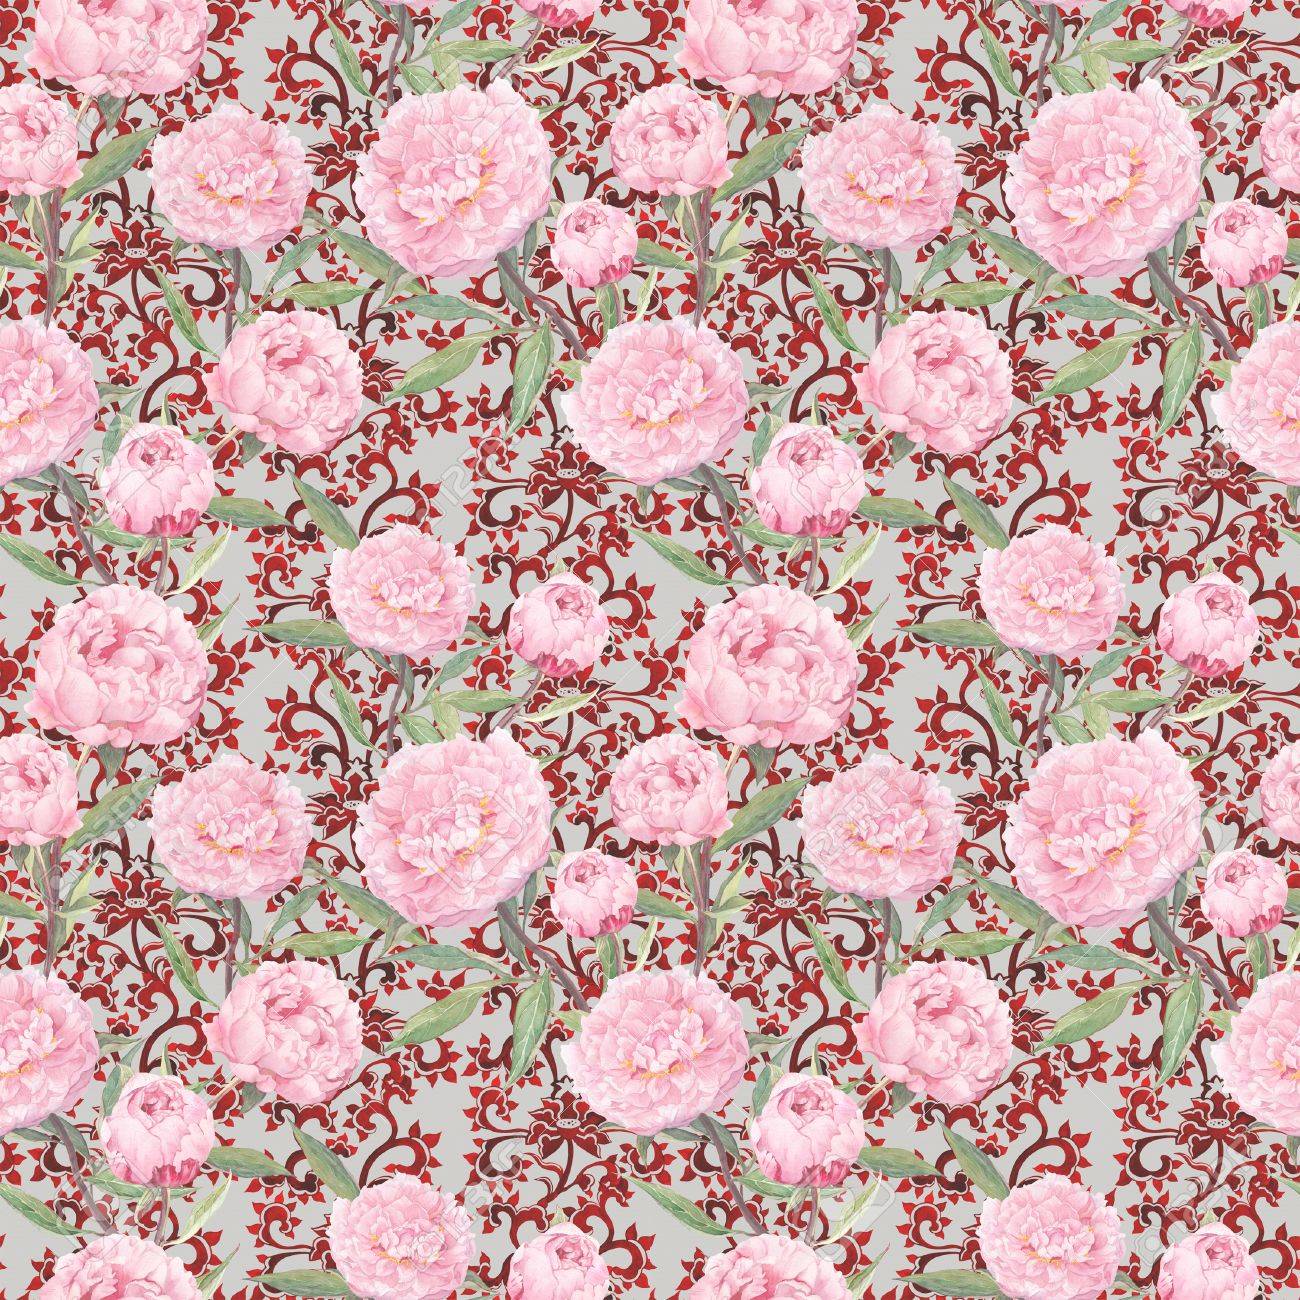 Pink Peony Flowers Floral Repeating Wallpaper Decorative